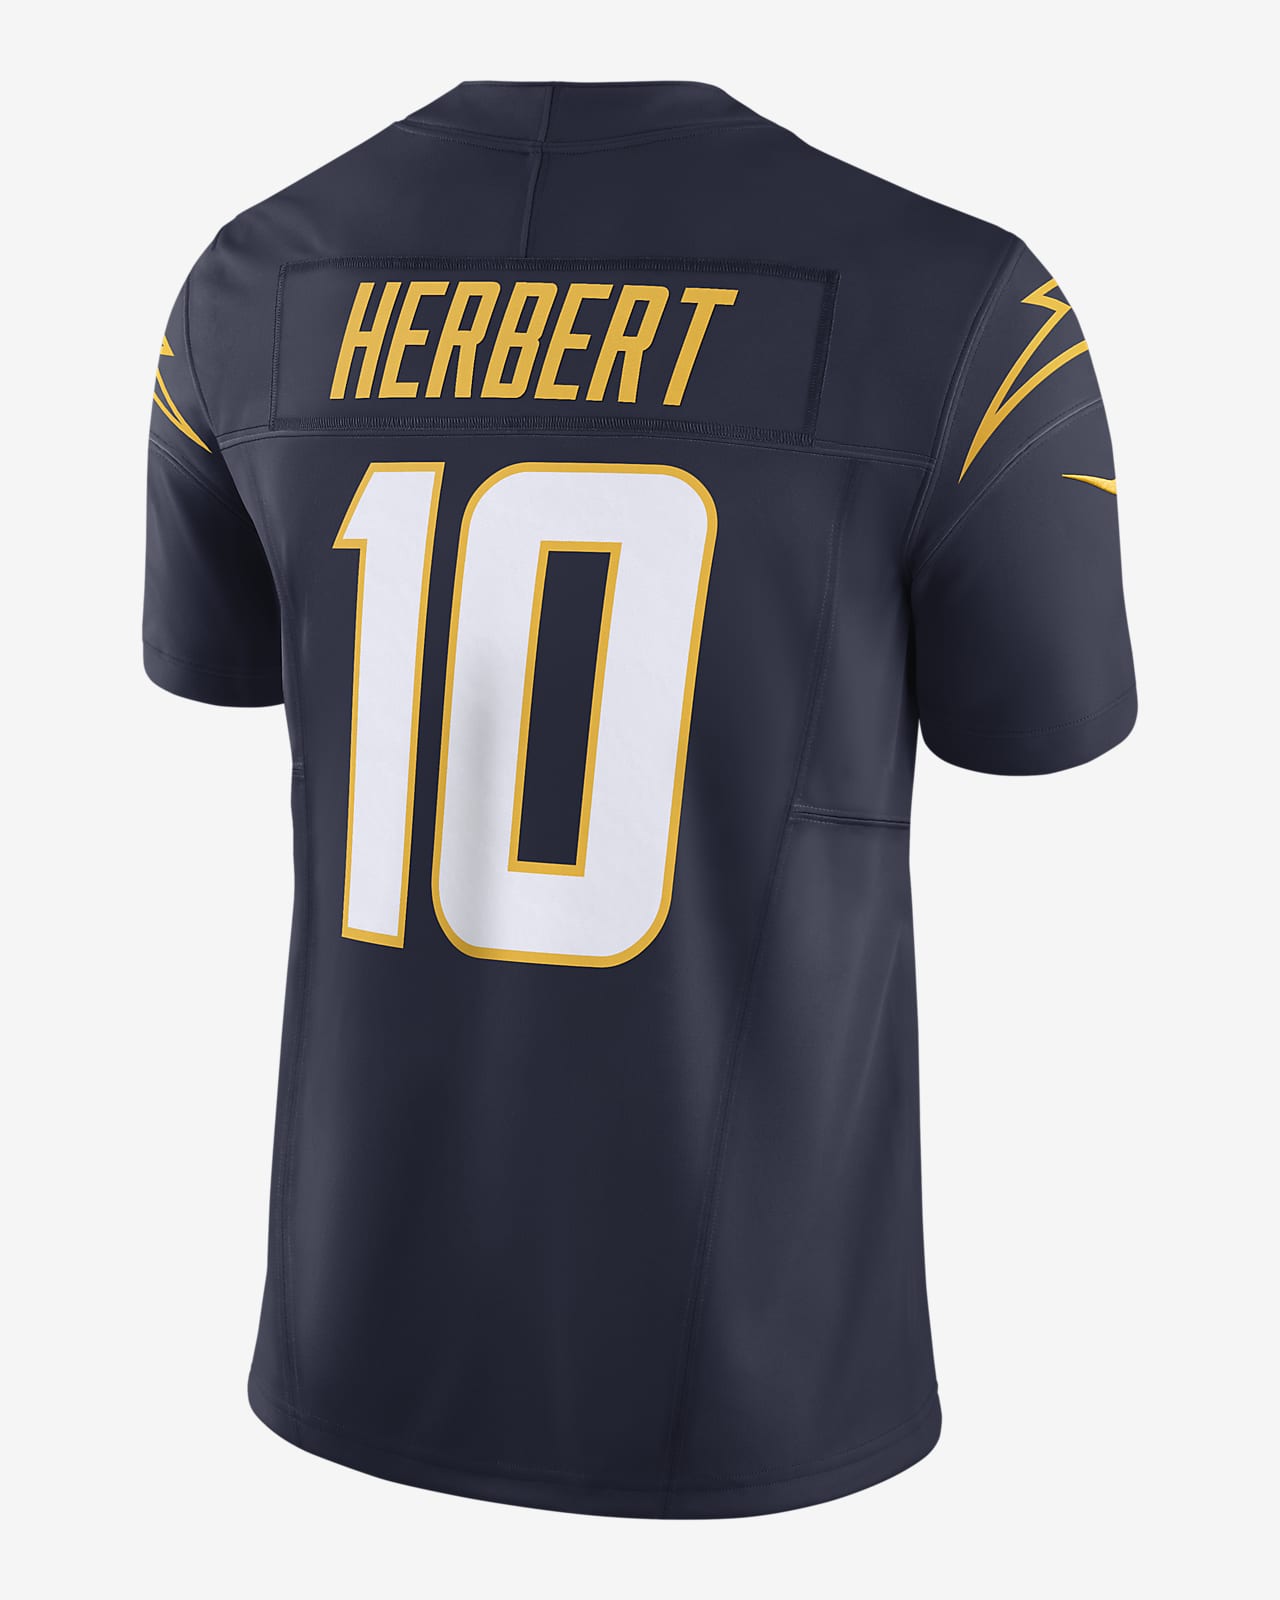 herbert from the chargers